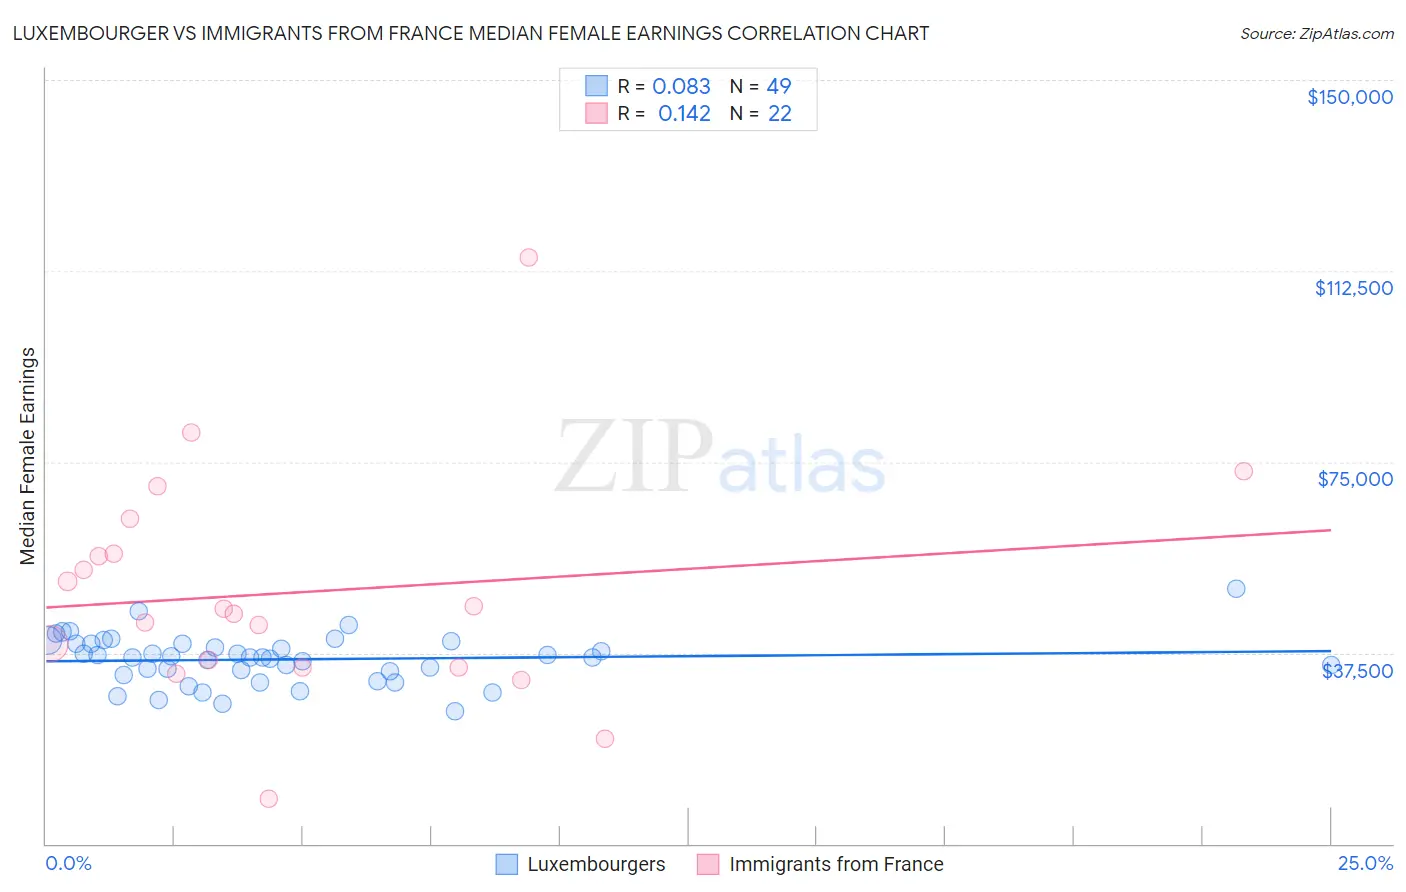 Luxembourger vs Immigrants from France Median Female Earnings